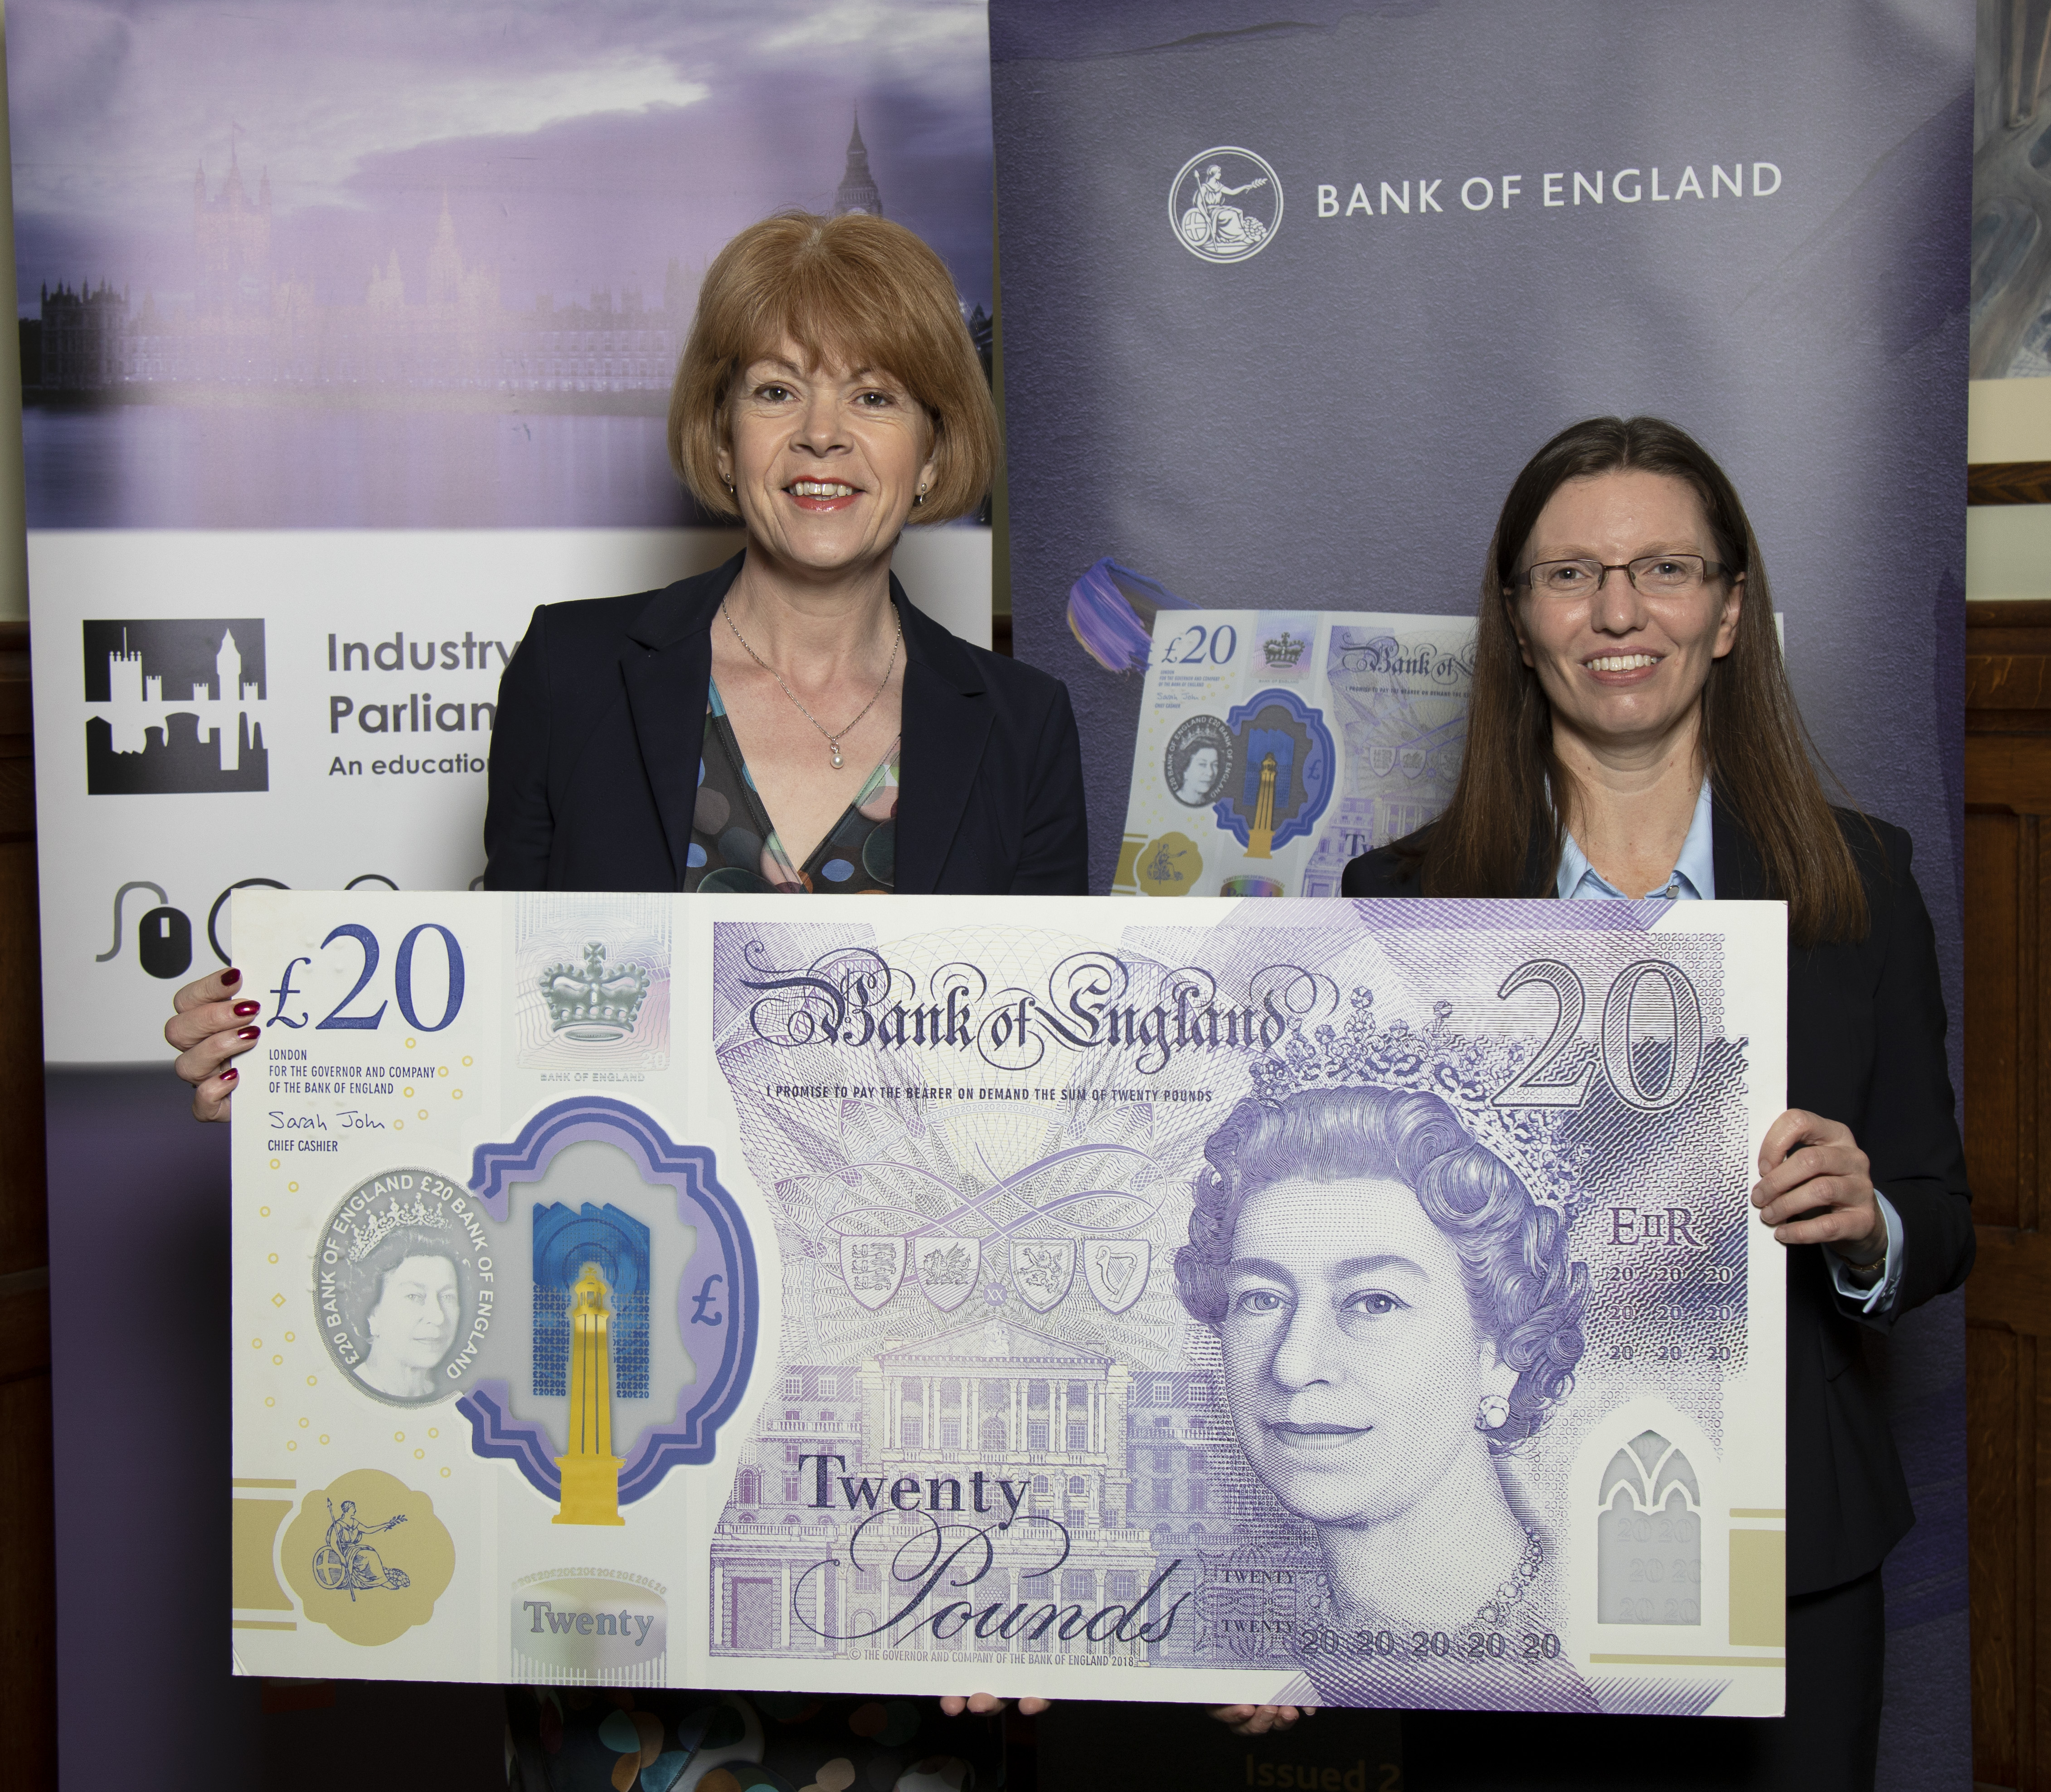 Watch out for the new £20 Note!